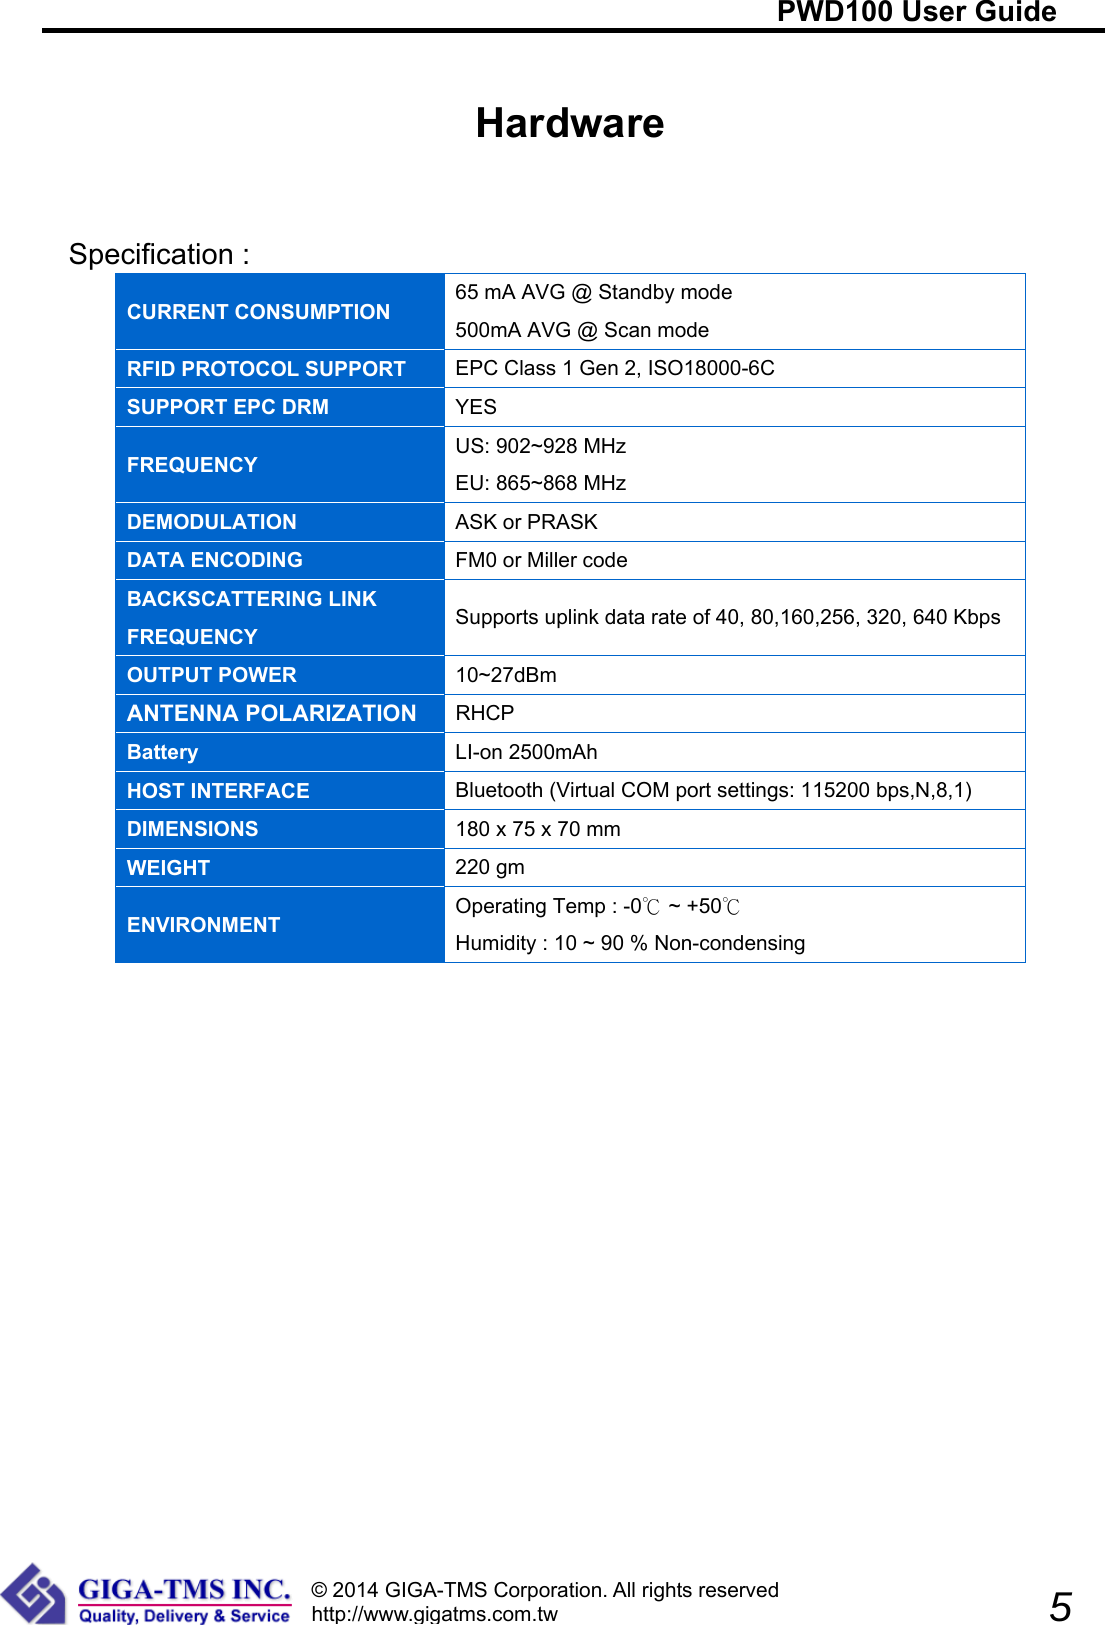                                                                     PWD100 User Guide              5 © 2014 GIGA-TMS Corporation. All rights reserved http://www.gigatms.com.tw Hardware   Specification :   CURRENT CONSUMPTION  65 mA AVG @ Standby mode 500mA AVG @ Scan mode RFID PROTOCOL SUPPORT  EPC Class 1 Gen 2, ISO18000-6C SUPPORT EPC DRM  YES FREQUENCY  US: 902~928 MHz EU: 865~868 MHz DEMODULATION  ASK or PRASK DATA ENCODING  FM0 or Miller code BACKSCATTERING LINK FREQUENCY  Supports uplink data rate of 40, 80,160,256, 320, 640 Kbps OUTPUT POWER  10~27dBm ANTENNA POLARIZATION    RHCP Battery  LI-on 2500mAh HOST INTERFACE  Bluetooth (Virtual COM port settings: 115200 bps,N,8,1) DIMENSIONS  180 x 75 x 70 mm WEIGHT  220 gm ENVIRONMENT  Operating Temp : -0  ~ +50℃℃ Humidity : 10 ~ 90 % Non-condensing  